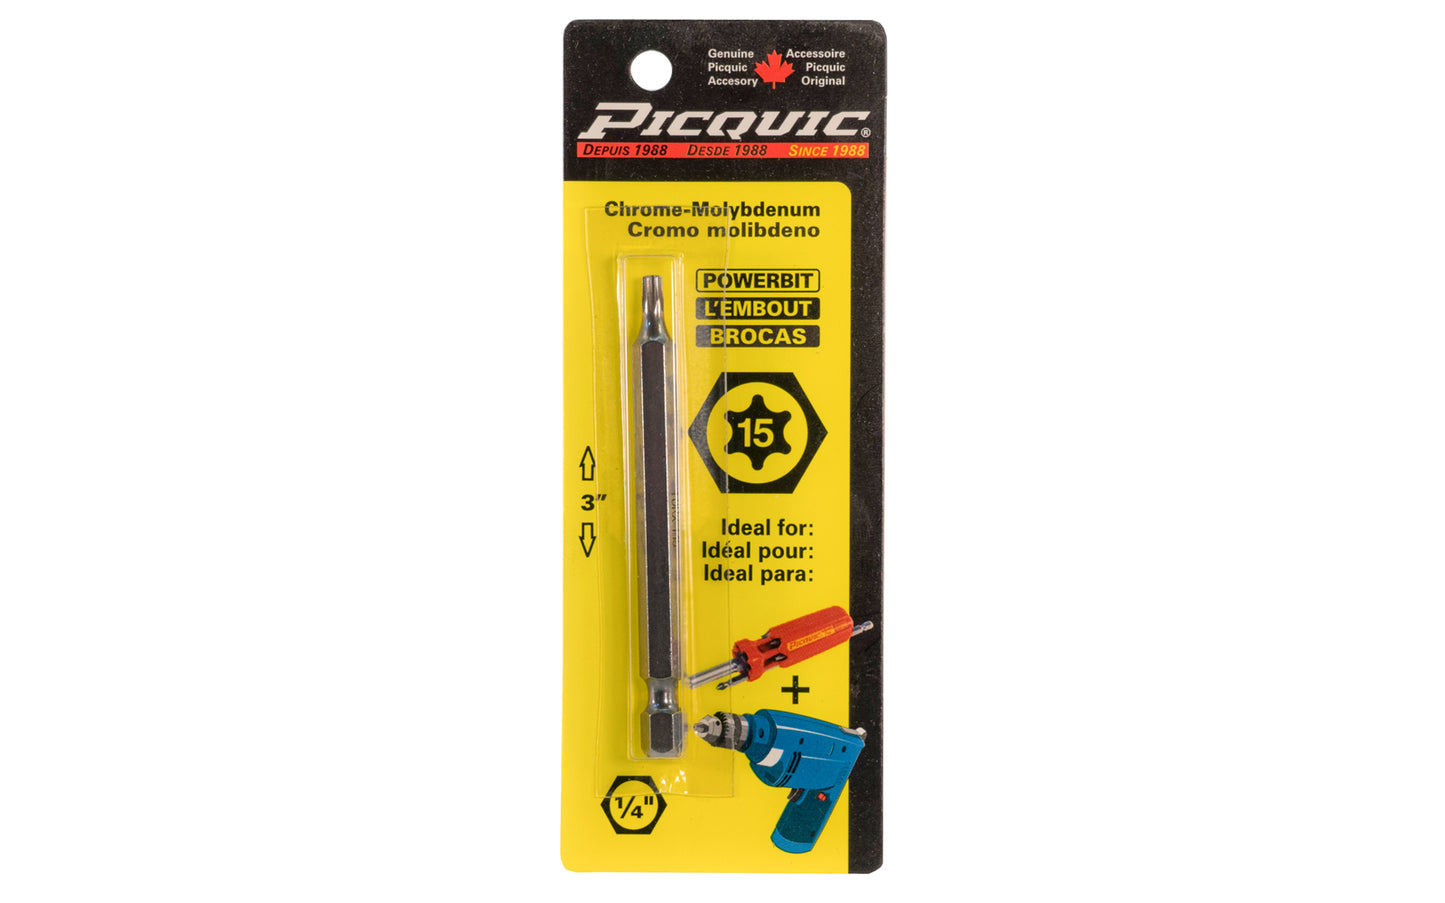 Picquic 3" length powerbit - Torx 15 bit. 1/4" hex shank power bits ideal for use in drills & impact drivers. Model 88215.